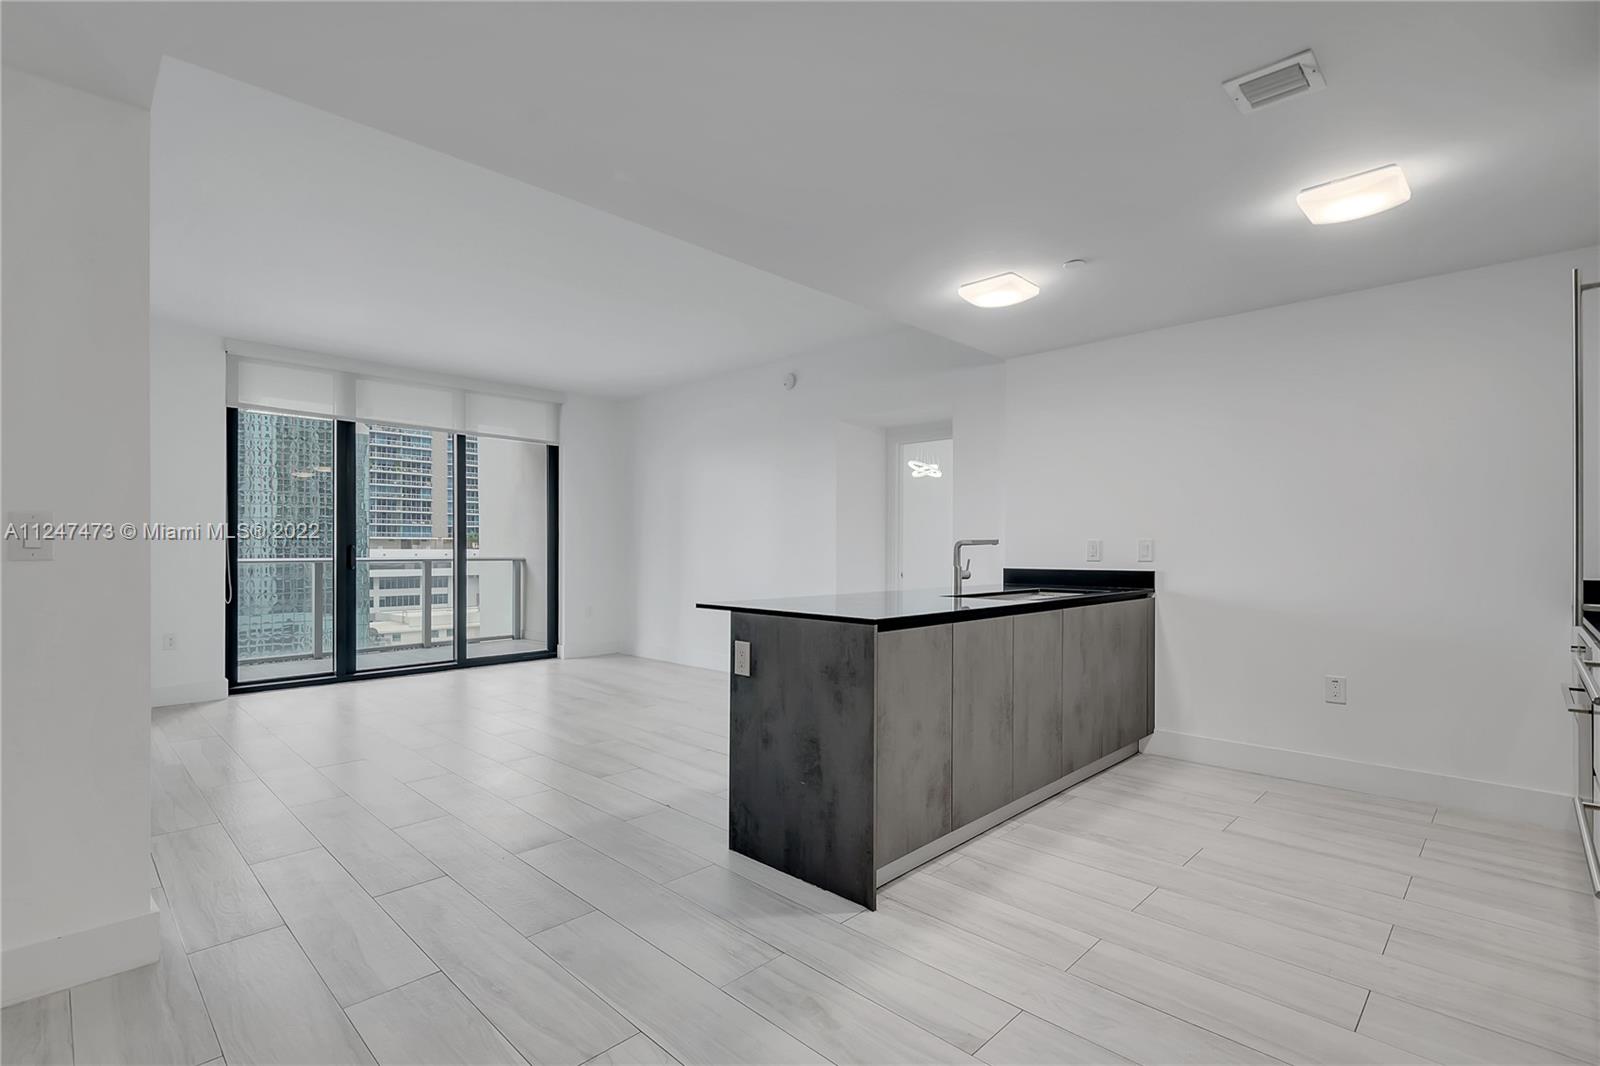 Enjoy the comfort of living in this spacious 2 BR + 3 BA + DEN that features an in-unit private elevator, 9-ft high ceilings, & floor-to-ceiling windows. 2 showers + 1 bathtub. In-unit W/D. Enjoy the skyline & partial bay views from the two in-unit balconies. 1010 BRICKELL is among the most amenitized buildings in Miami: rooftop pool & lounge, indoor poor, outdoor running/walking track, fitness center, indoor basketball/racquetball courts, kids playroom, game room, virtual golf, BBQ area, & spa. Located in the heart of Brickell within walking distance to the Metromover (public transportation), restaurant & shops, Brickell City Centre, & Mary Brickell Village. Short drive to Miami Beach, Key Biscayne, Coconut Grove, Downtown Miami, Wynwood/Midtown, & Design District.